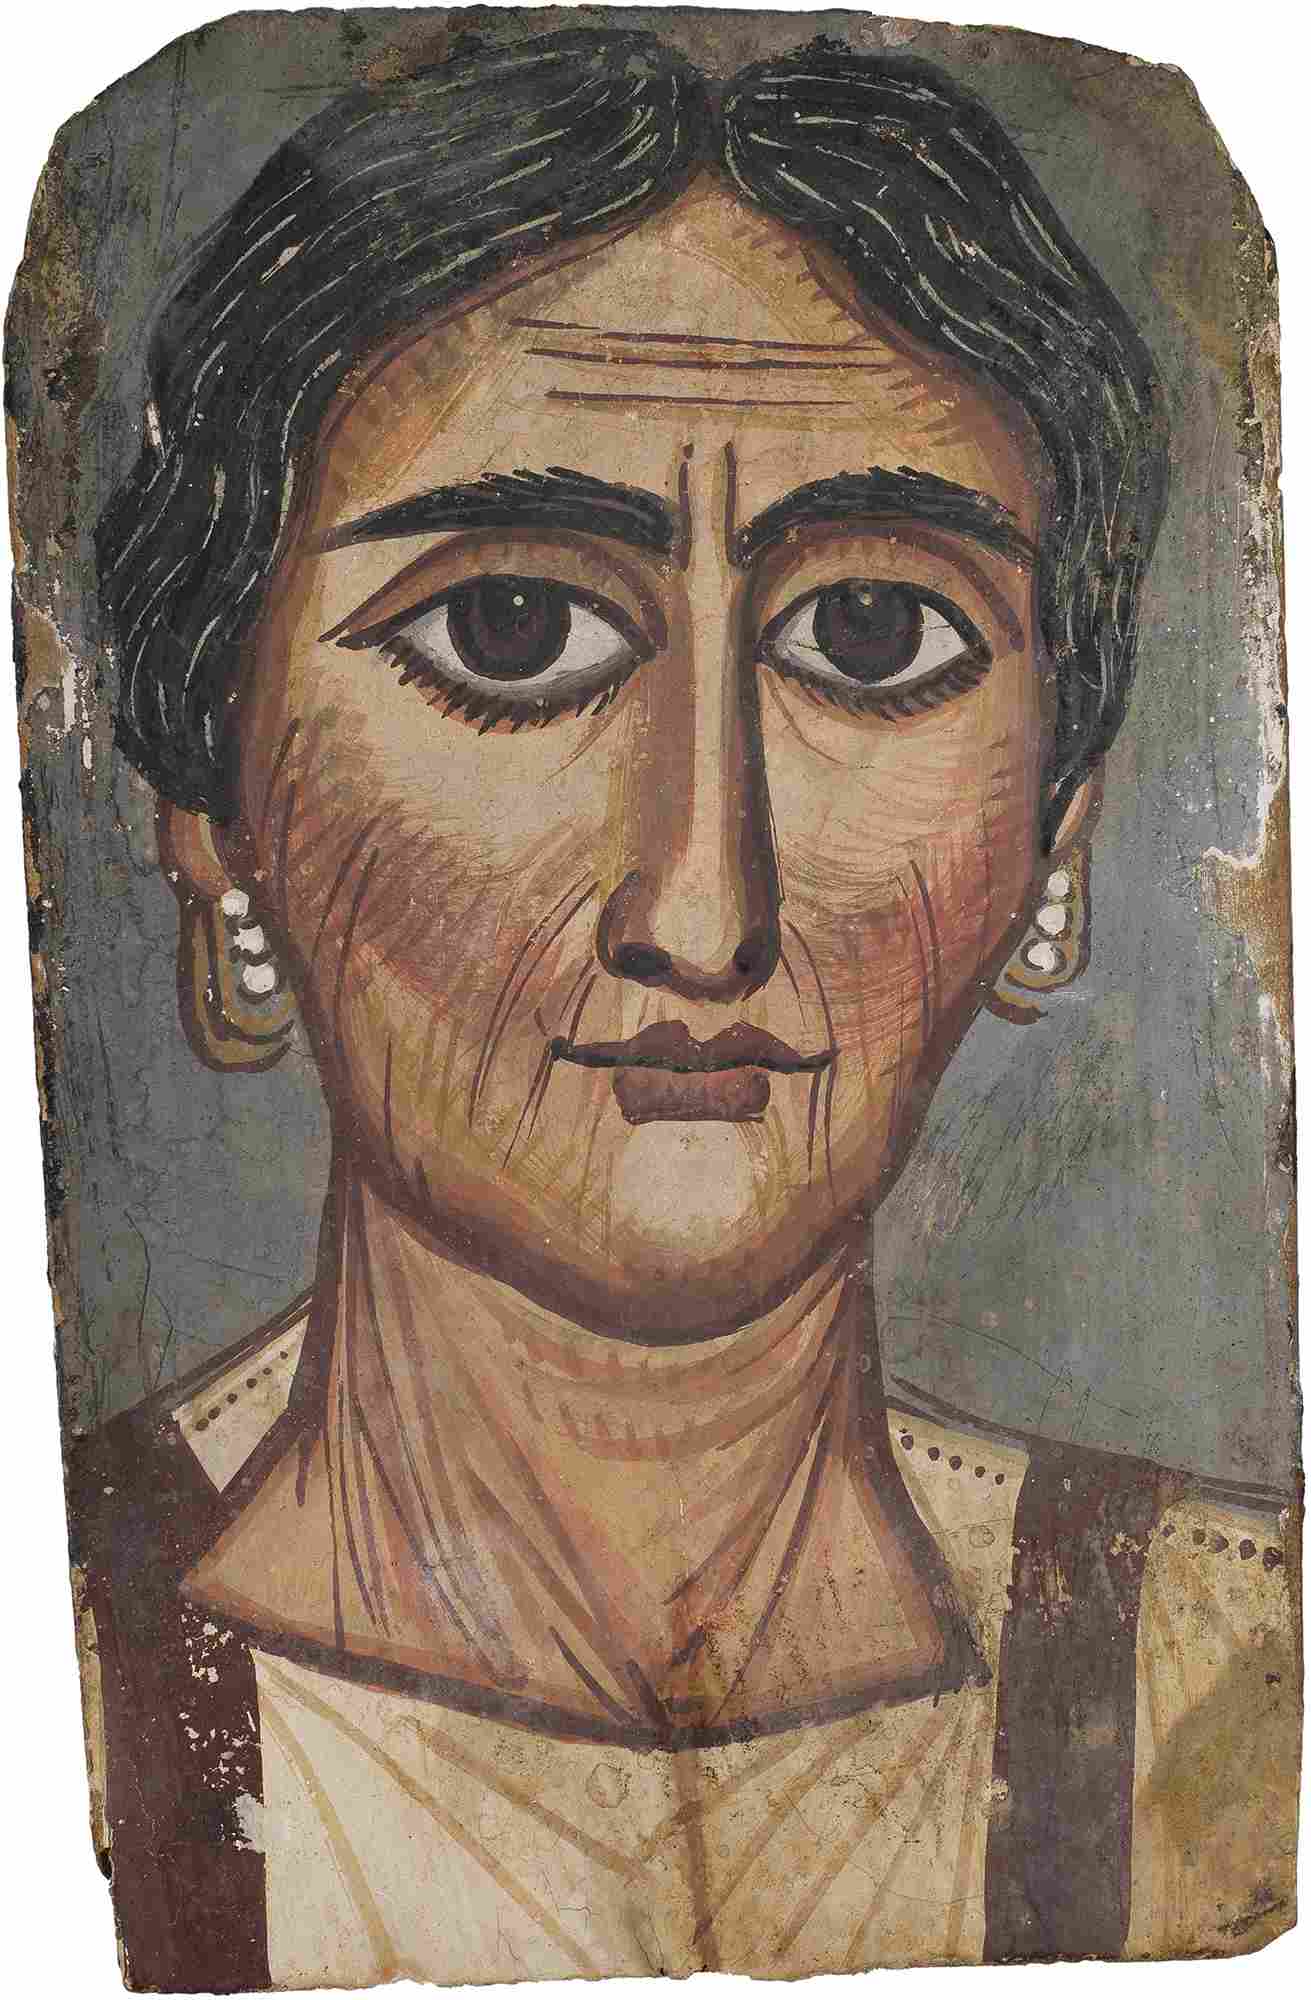 Roman Egyptian Mummy Portraits and the Artistic Circle of the St. Louis Painter